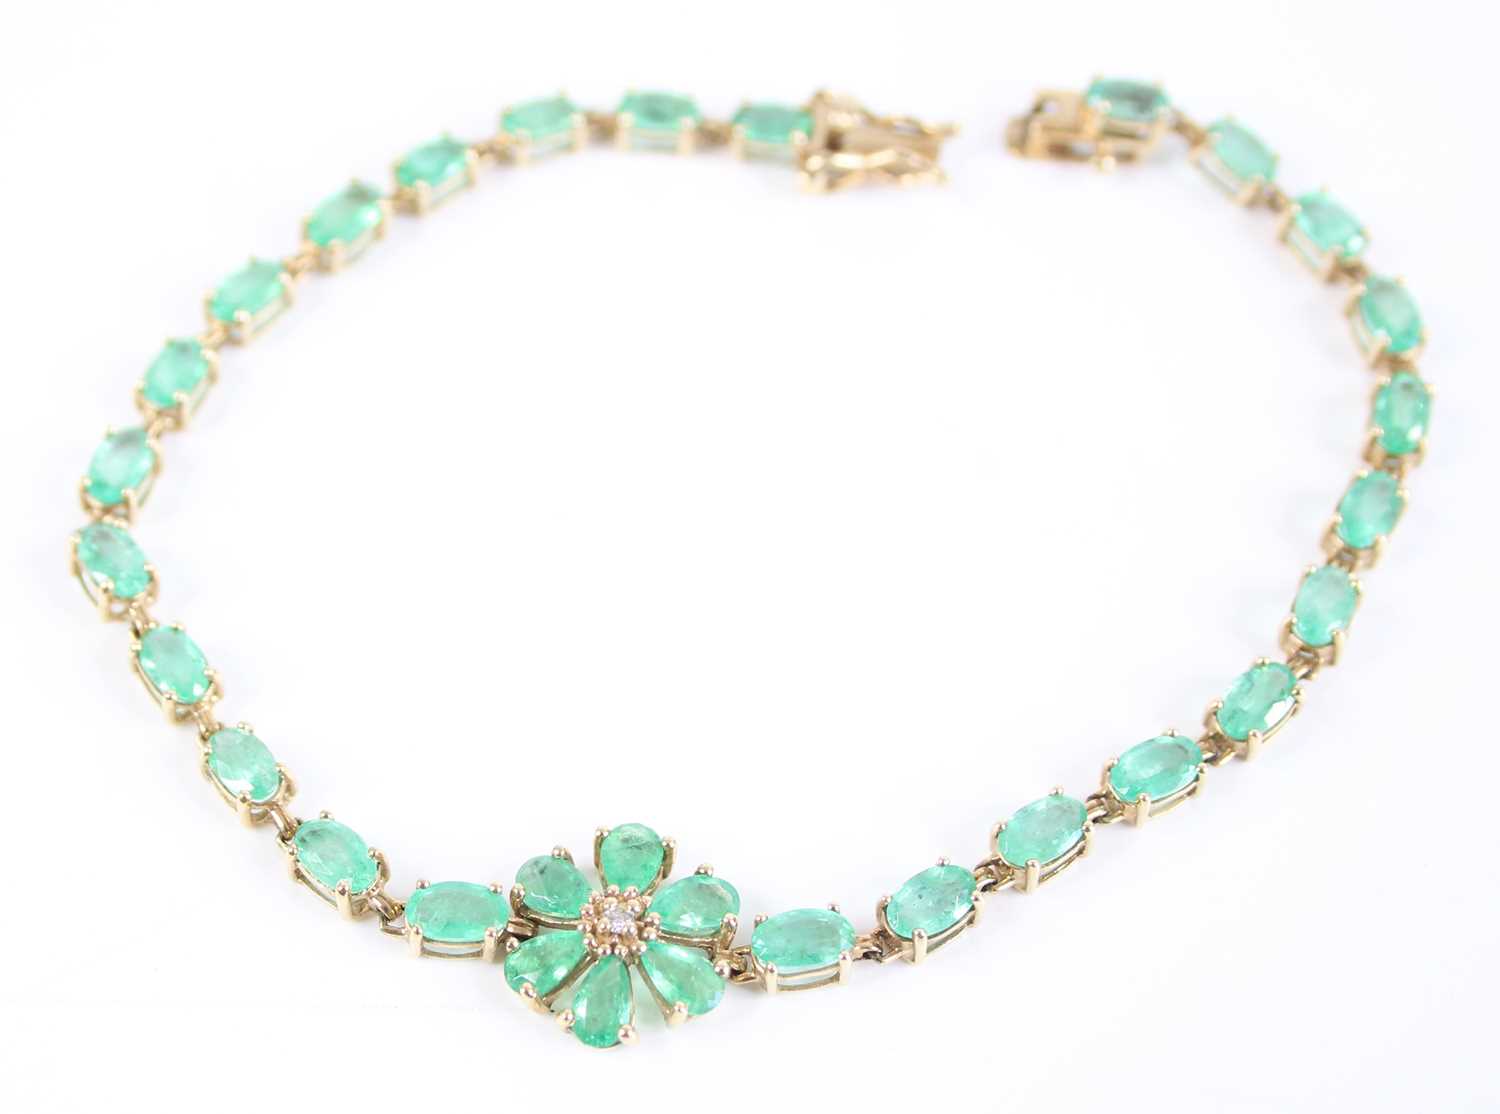 A 9ct yellow gold emerald multi-stone bracelet, comprising a centre flower motif with six pear cut